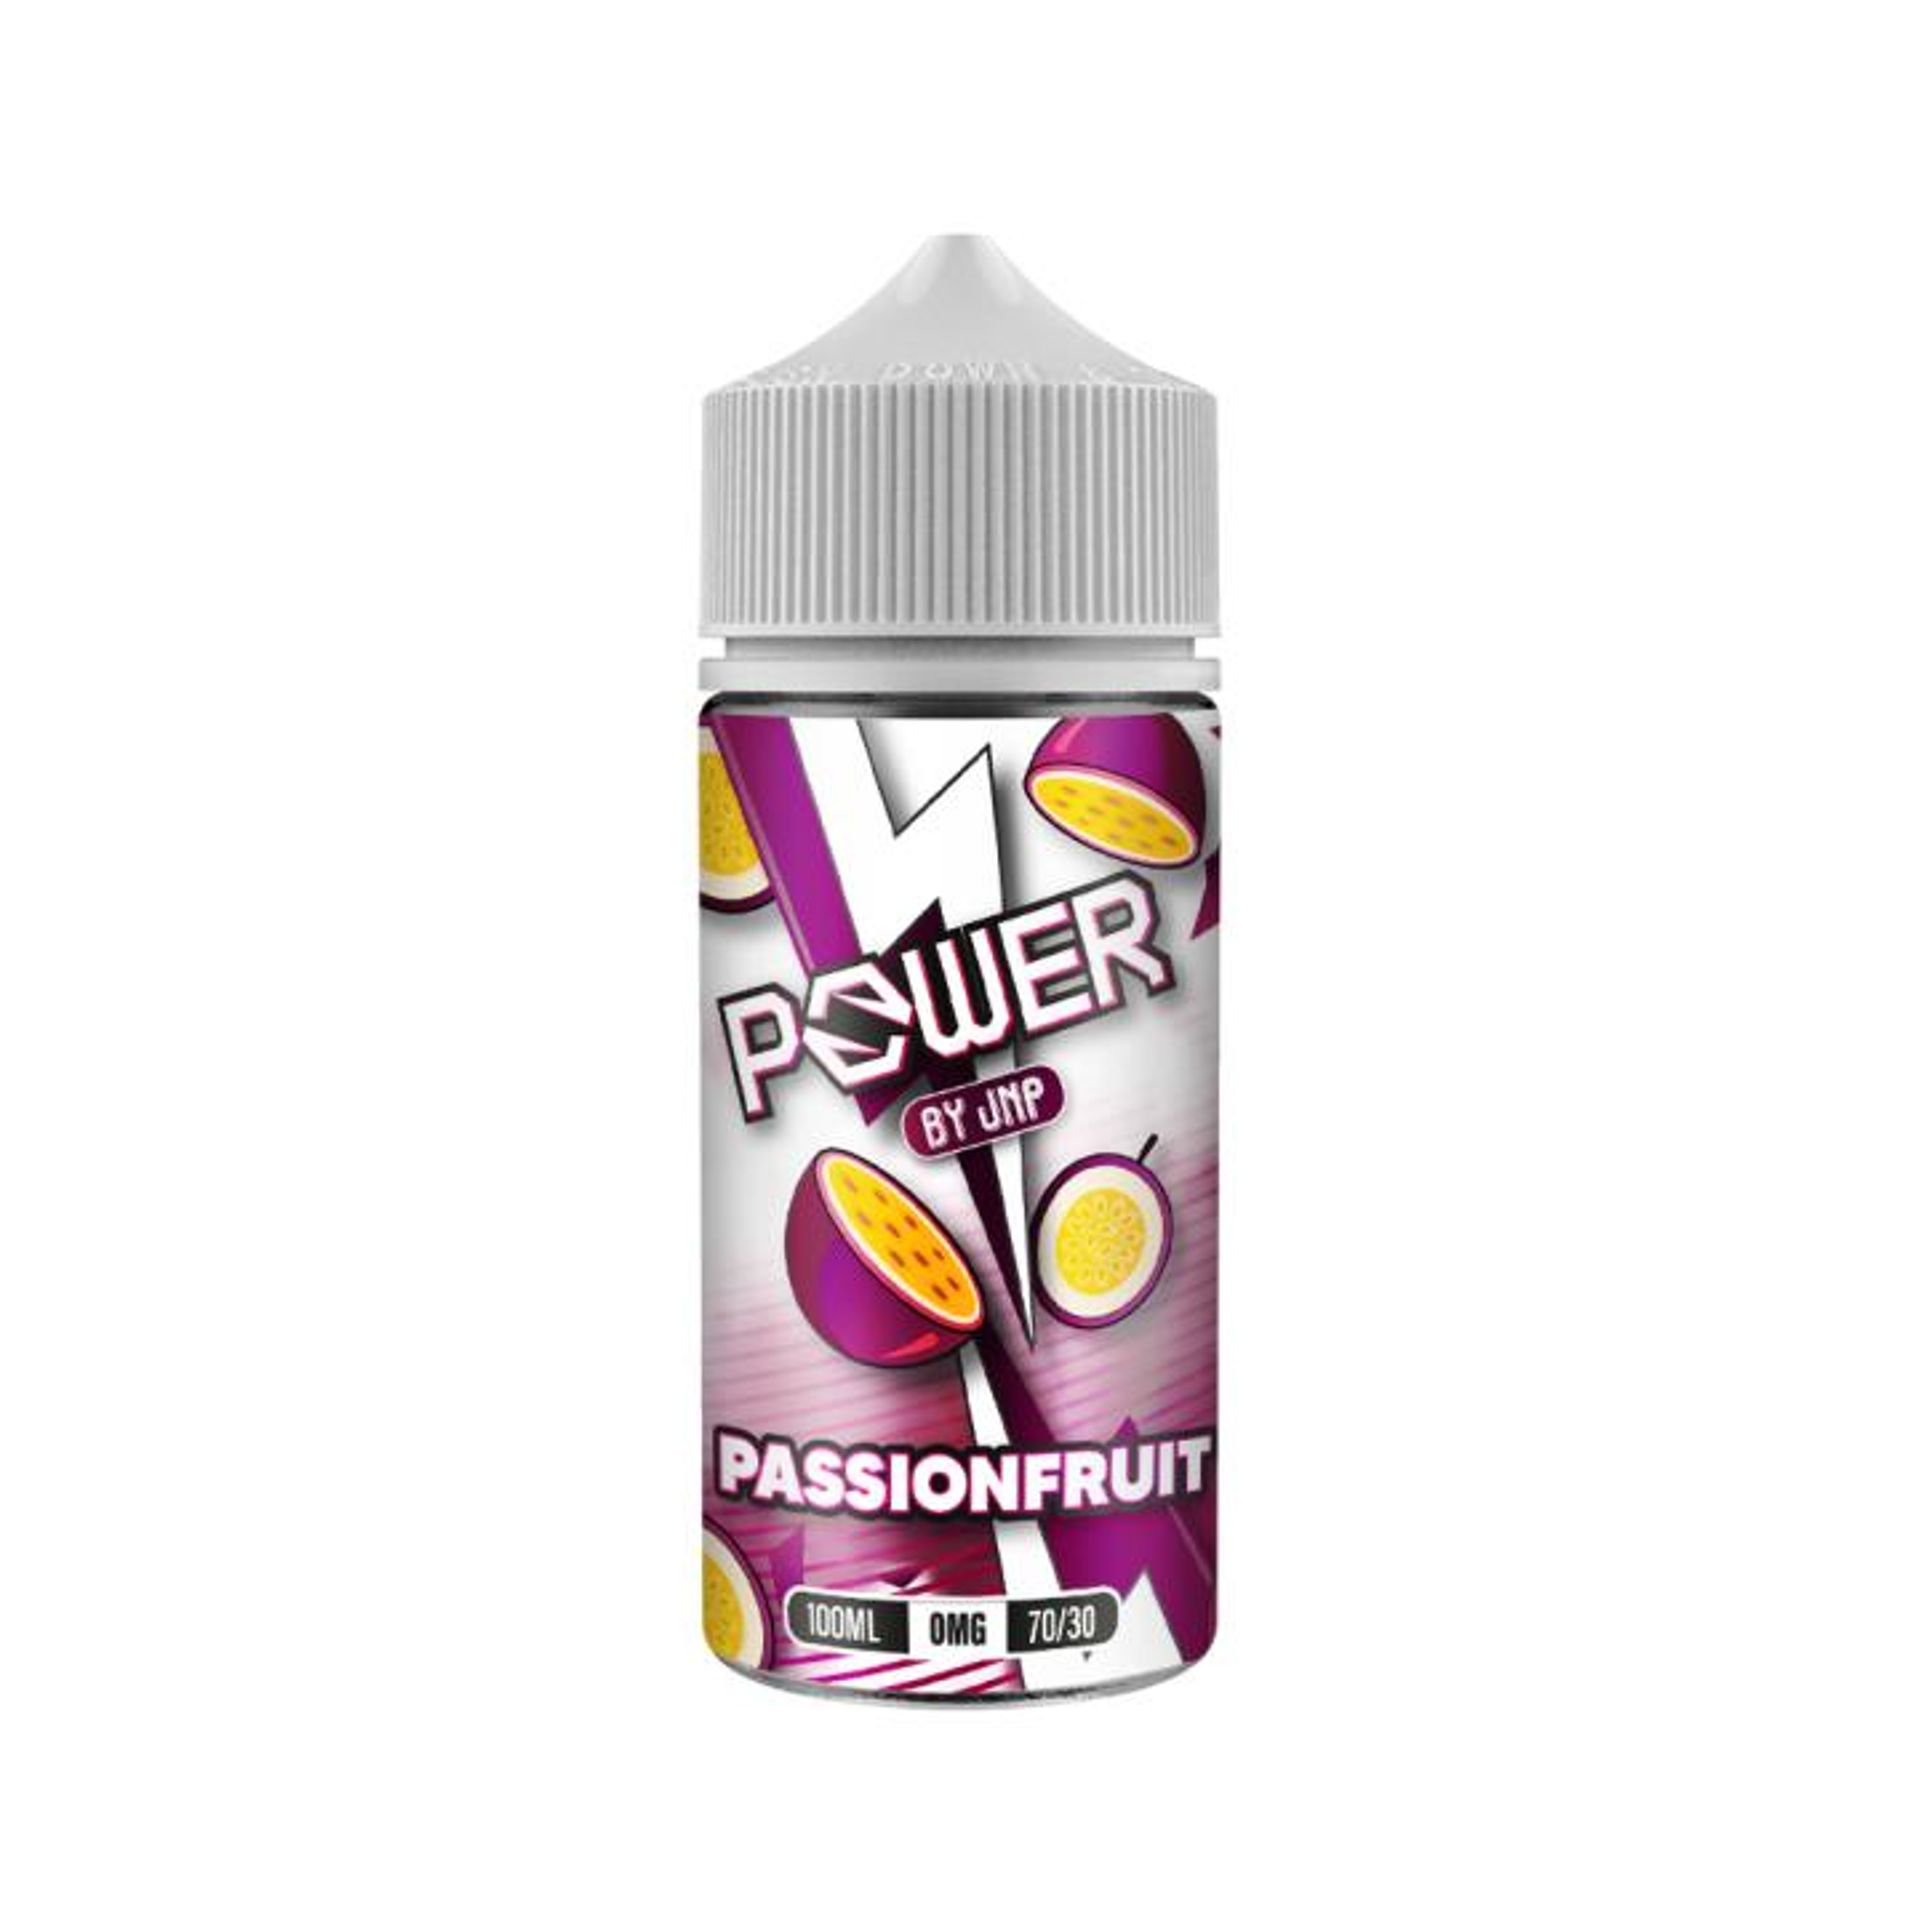 Image of Passion Fruit by Power Bar